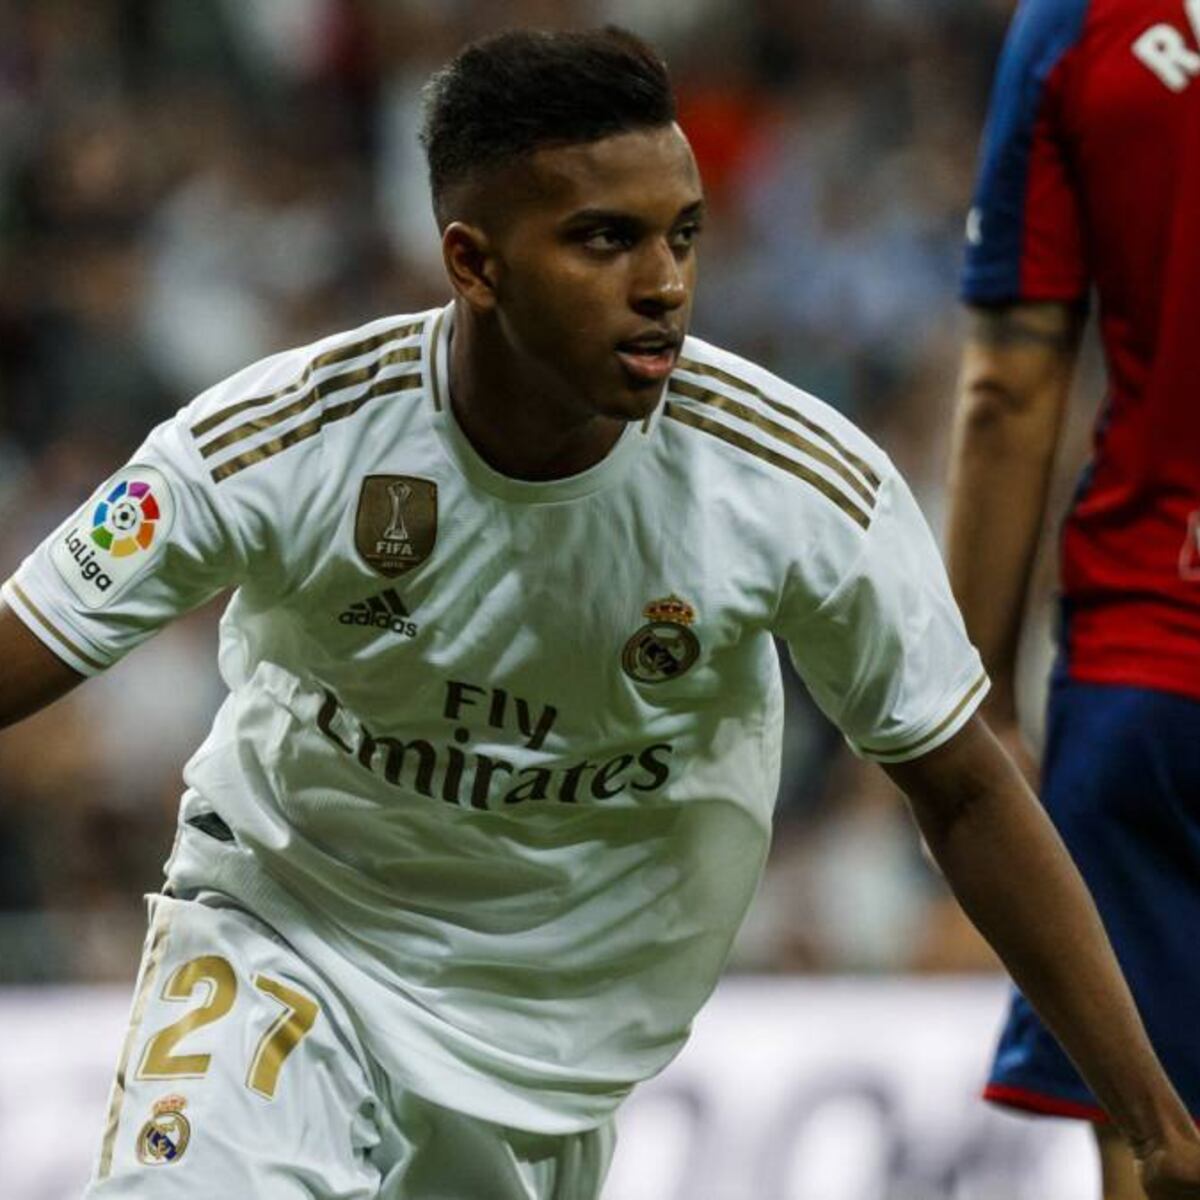 EuroFoot on X: 🇧🇷🧠 Rodrygo: Today I play for the biggest national team  in the world and the biggest club in the world. If I don't want pressure  playing for those two